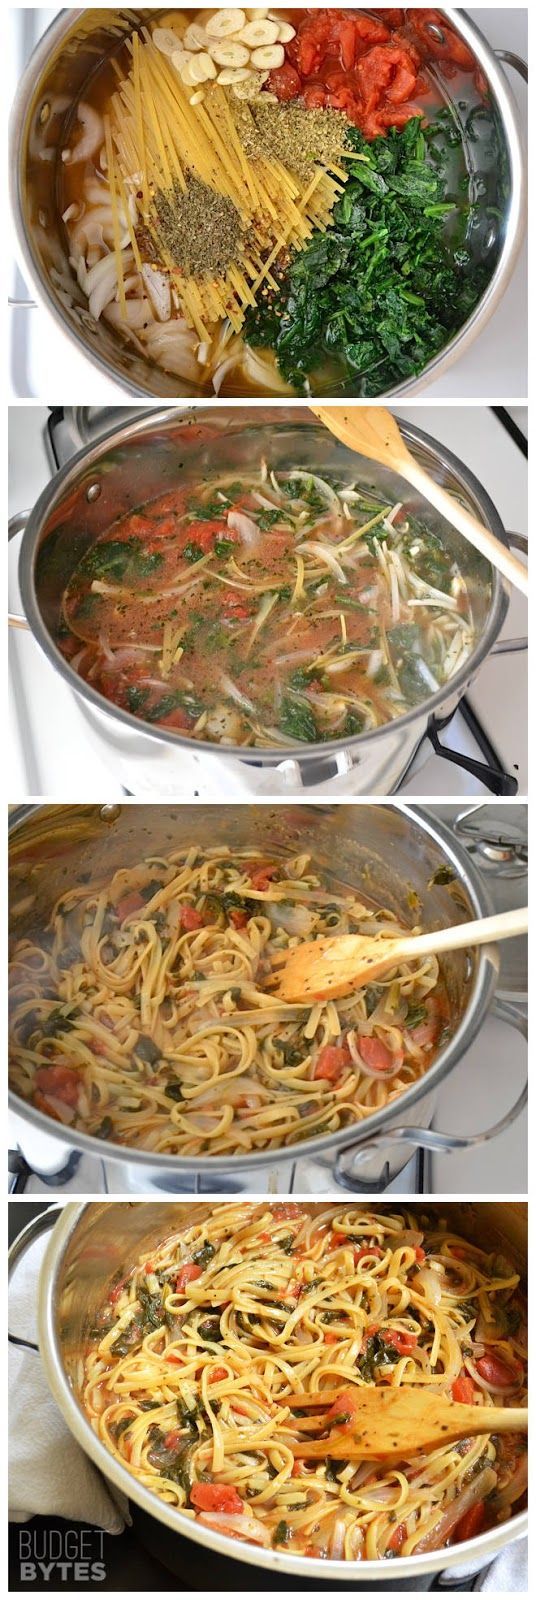 Italian Wonderpot – This pasta is incredibly easy to make and inexpensive. No draining necessary! Switch out whichever veggies you like or add more to make it your